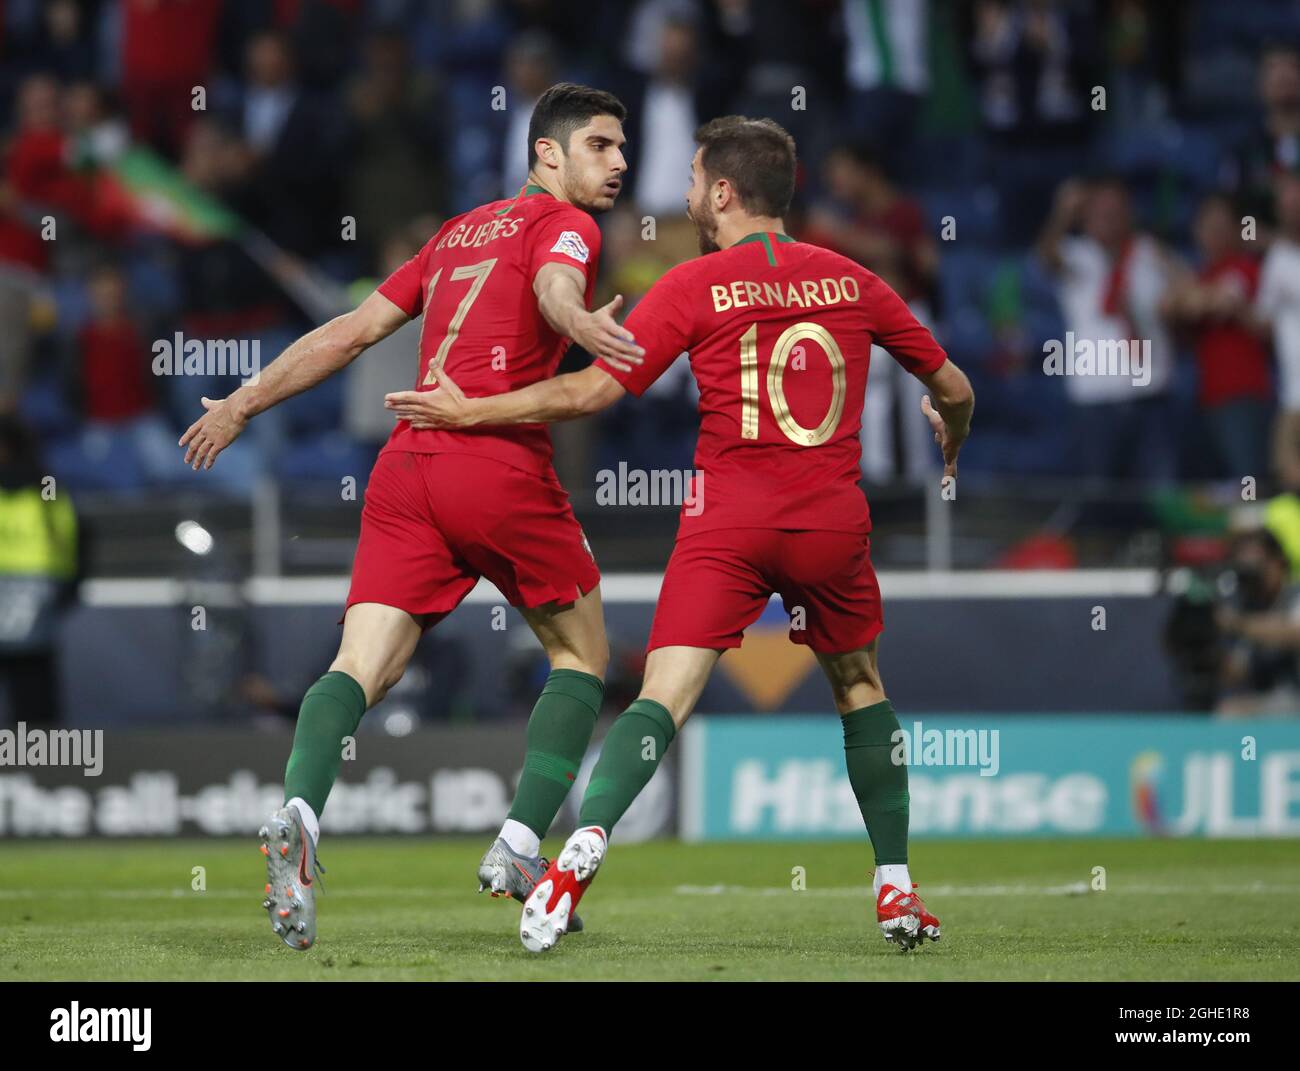 Goncalo Guedes of Portugal (L) turns to celebrate scoring the first goal with Bernardo Silva of Portugal during the UEFA Nations League match at the Estadio do Dragao, Porto. Picture date: 9th June 2019. Picture credit should read: David Klein/Sportimage via PA Images Stock Photo